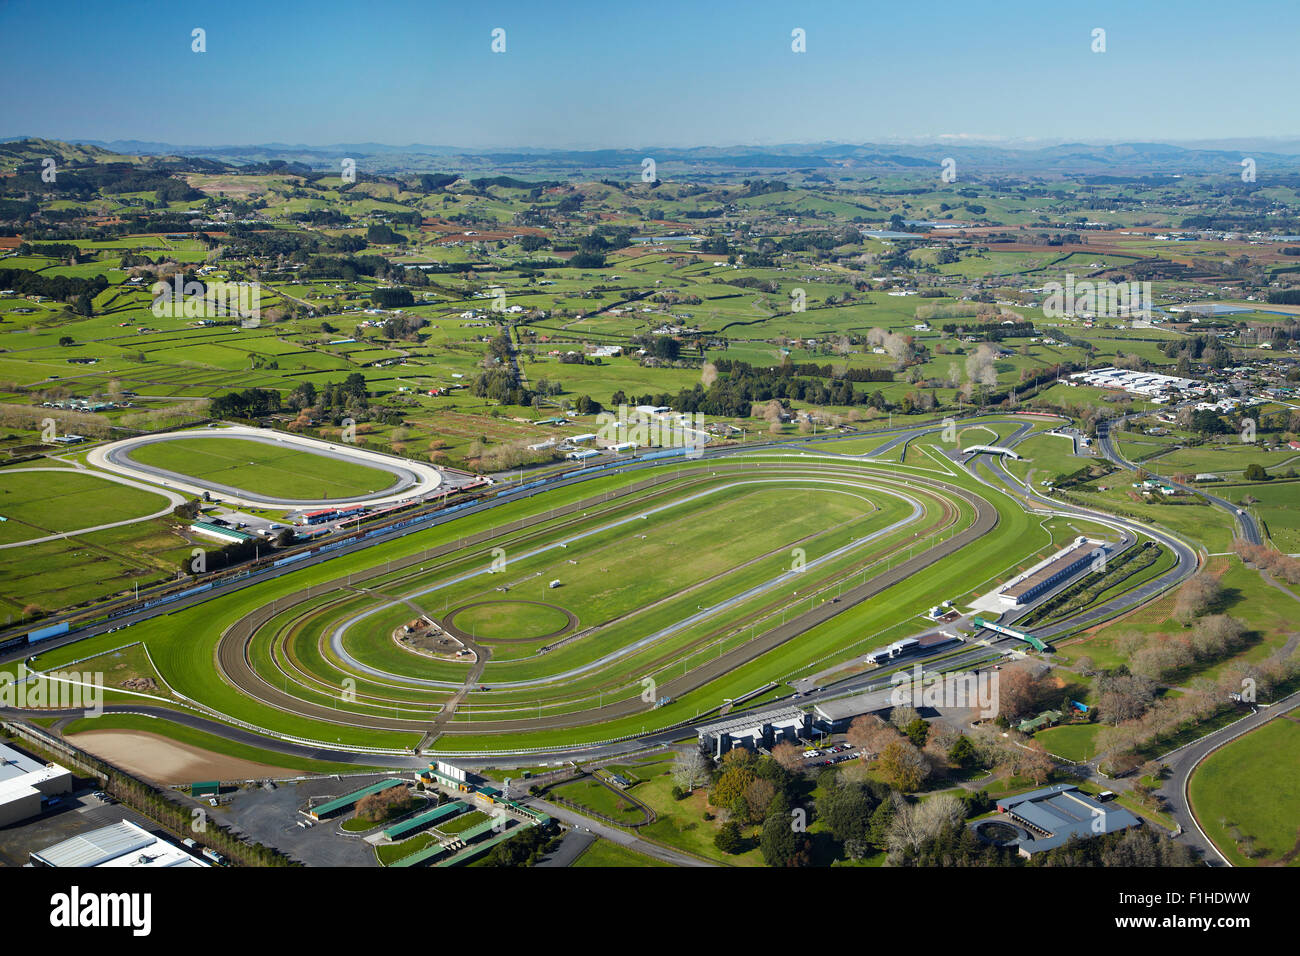 Pukekohe Park Raceway with motor and horse racing circuits, Pukekohe, South Auckland, North Island, New Zealand - aerial Stock Photo